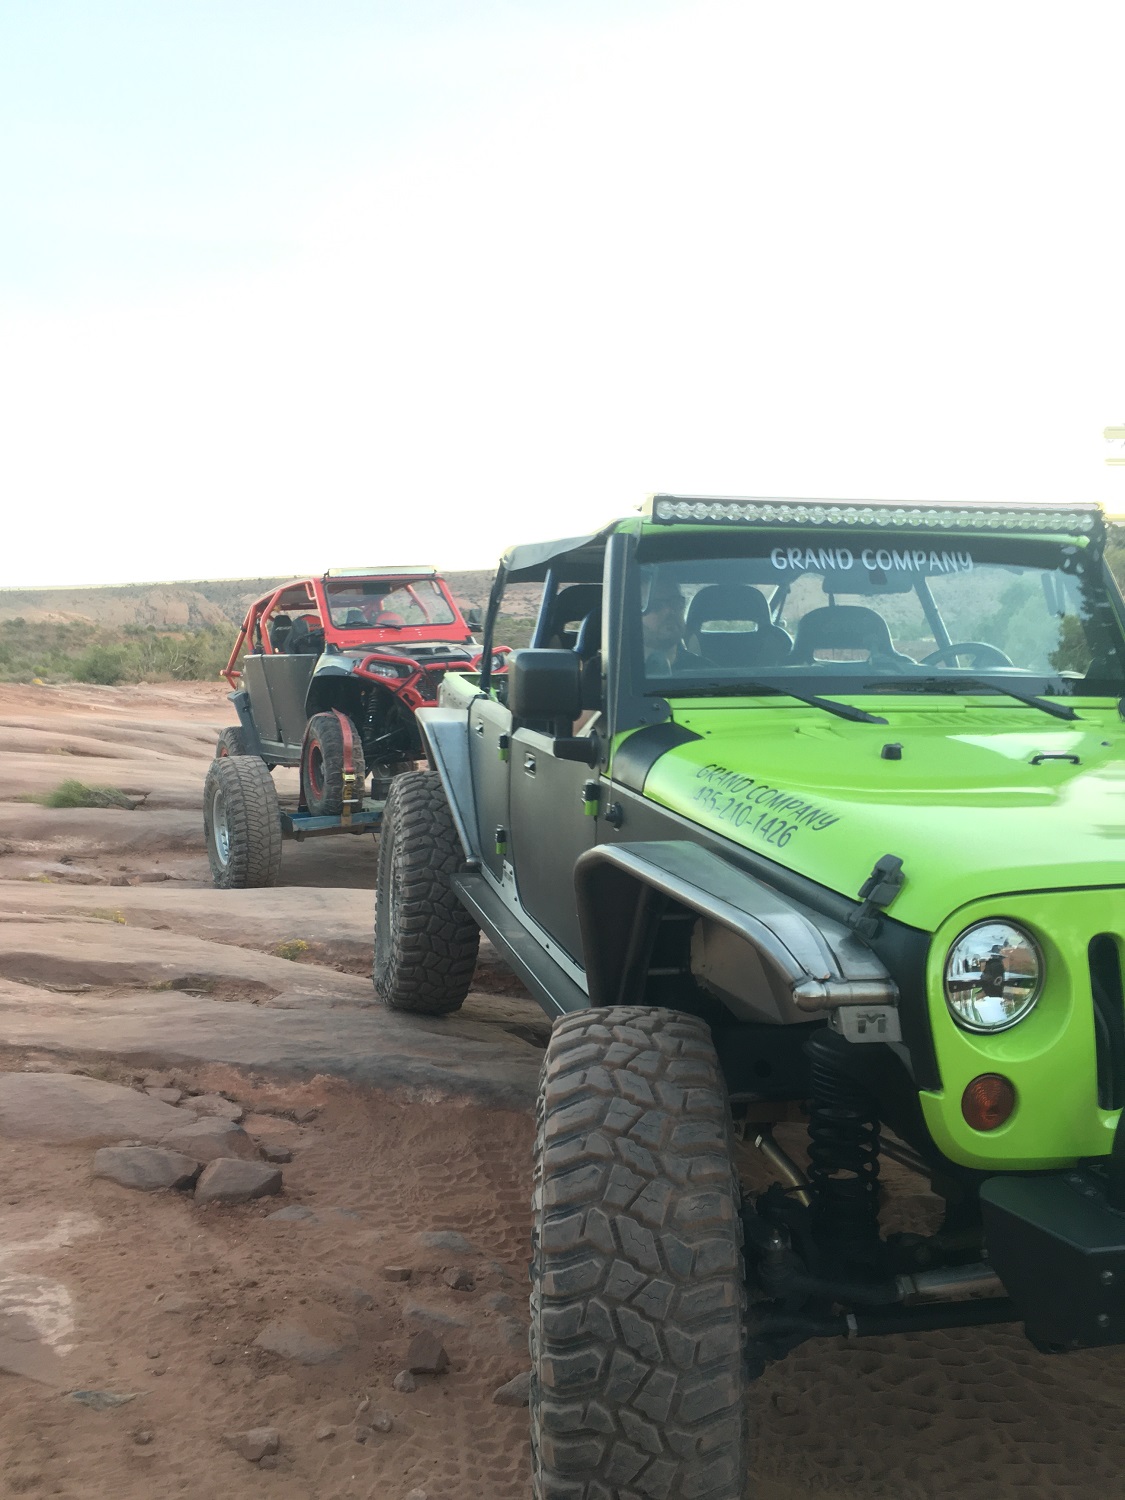 Off-Road Vehicle Recovery by Grand Company in Moab, UTOff-Road Vehicle Recovery by Grand Company in Moab, UT